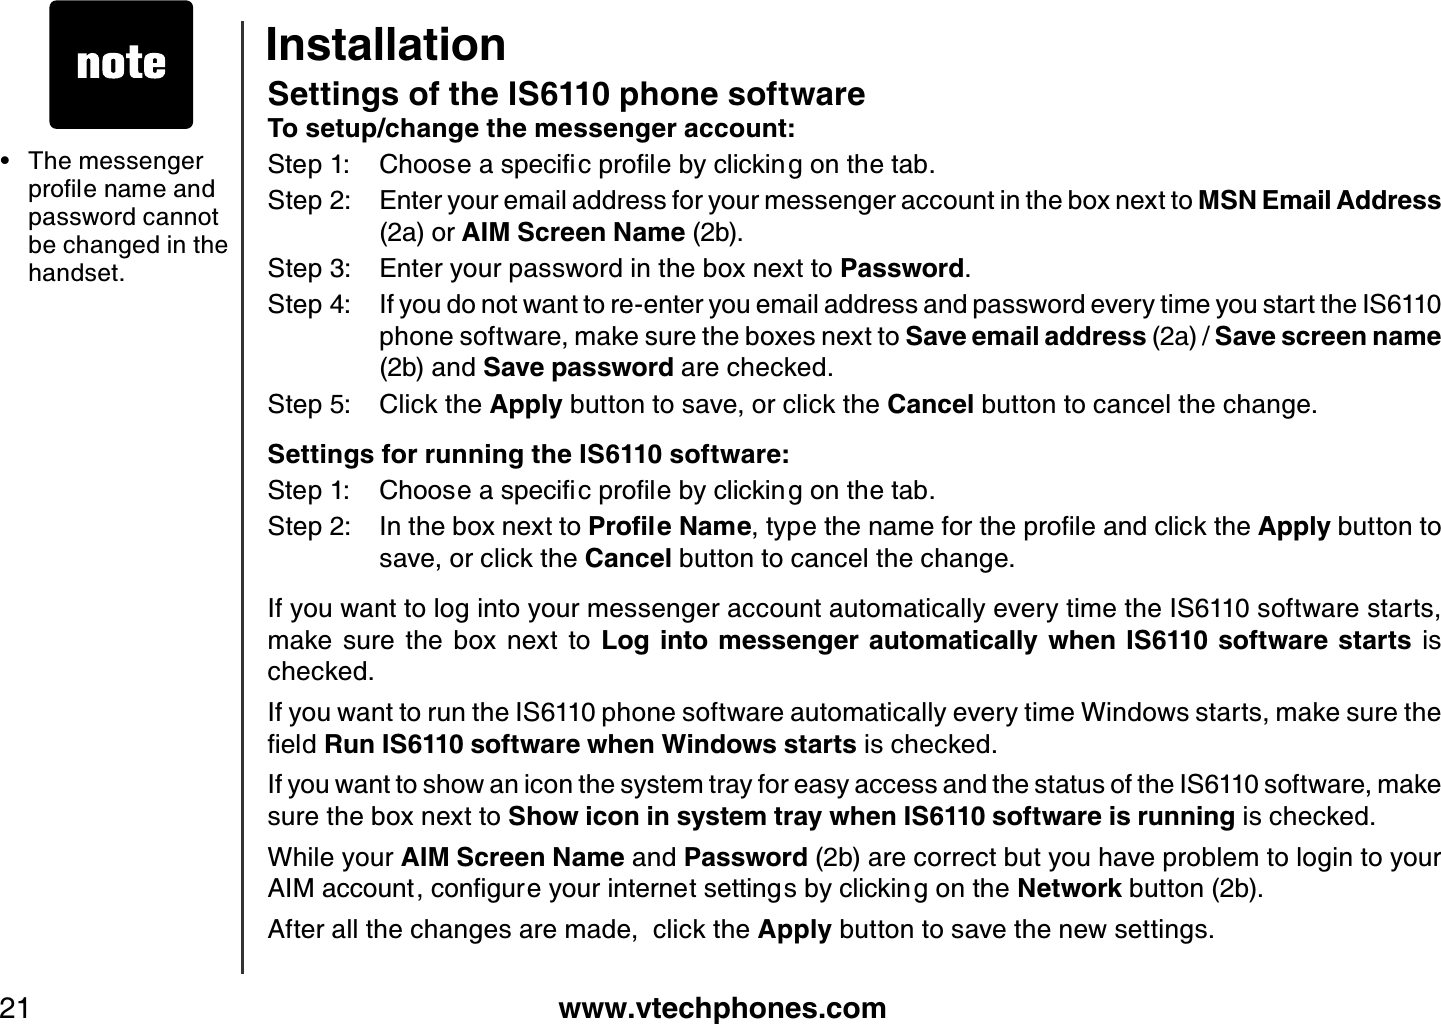 www.vtechphones.com21Settings of the IS6110 phone softwareTo setup/change the messenger account:5VGR %JQQUGCURGEKſERTQſNGD[ENKEMKPIQPVJGVCDStep 2: Enter your email address for your messenger account in the box next to MSN Email Address (2a) or AIM Screen Name (2b). Step 3: Enter your password in the box next to Password.Step 4: If you do not want to re-enter you email address and password every time you start the IS6110 phone software, make sure the boxes next to Save email address (2a) / Save screen name (2b) and Save password are checked.Step 5: Click the Apply button to save, or click the Cancel button to cancel the change.Settings for running the IS6110 software:5VGR %JQQUGCURGEKſERTQſNGD[ENKEMKPIQPVJGVCDStep 2: In the box next to 2TQſNG0COGV[RGVJGPCOGHQTVJGRTQſNGCPFENKEMVJGApply button to save, or click the Cancel button to cancel the change.If you want to log into your messenger account automatically every time the IS6110 software starts, make  sure  the  box  next  to  Log  into messenger  automatically when  IS6110  software starts  is checked.If you want to run the IS6110 phone software automatically every time Windows starts, make sure the ſGNFRun IS6110 software when Windows starts is checked.If you want to show an icon the system tray for easy access and the status of the IS6110 software, make sure the box next to Show icon in system tray when IS6110 software is running is checked.While your AIM Screen Name and Password (2b) are correct but you have problem to login to your #+/CEEQWPVEQPſIWTG[QWTKPVGTPGVUGVVKPIUD[ENKEMKPIQPVJGNetwork button (2b). After all the changes are made,  click the Apply button to save the new settings.The messenger RTQſNGPCOGCPFpassword cannot be changed in the handset.•Installation